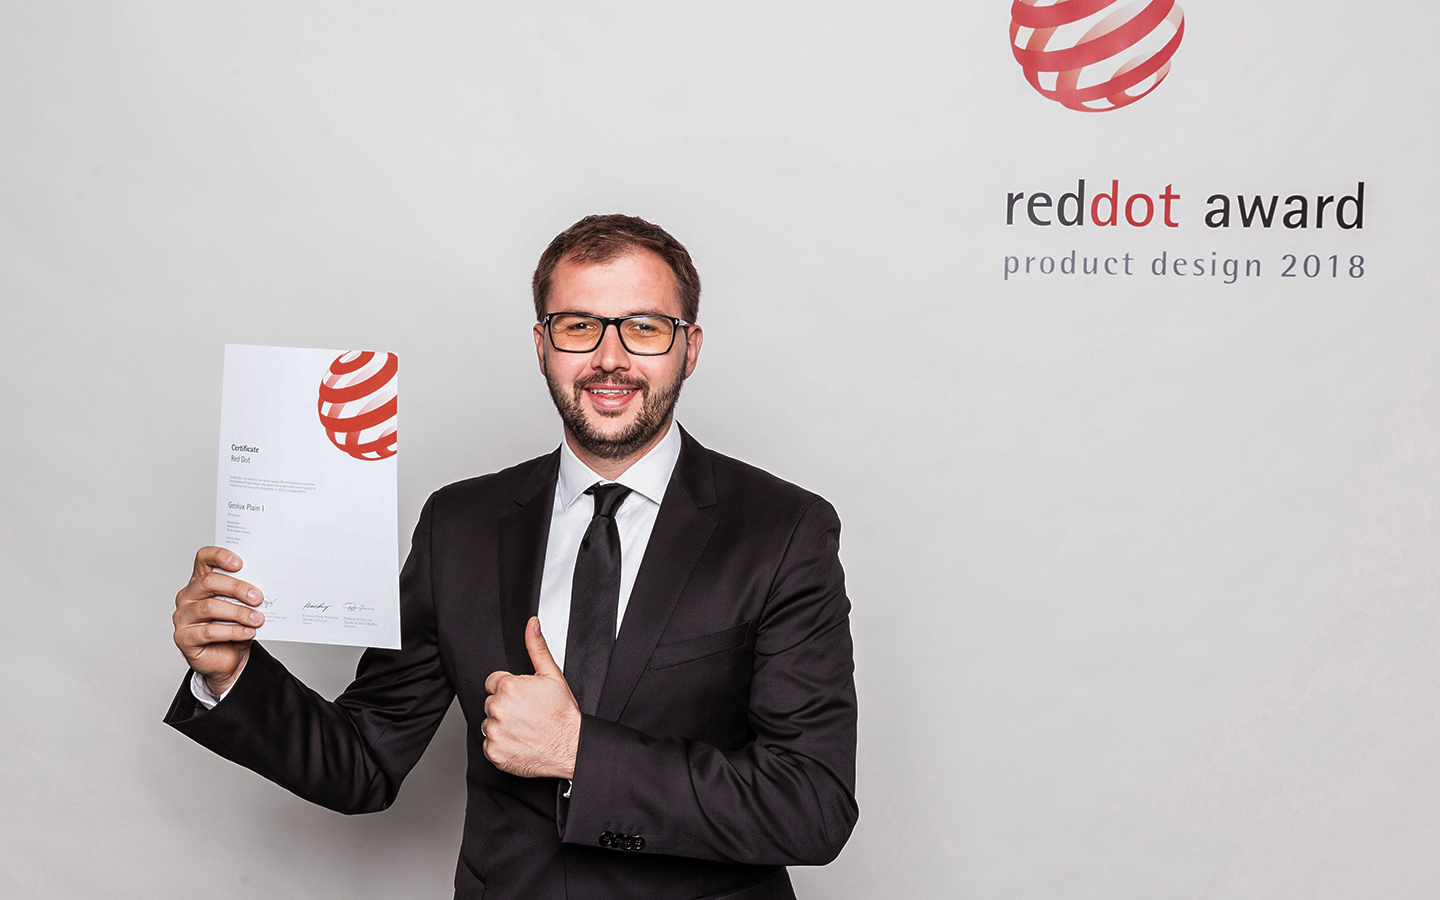 We received the Red Dot award!